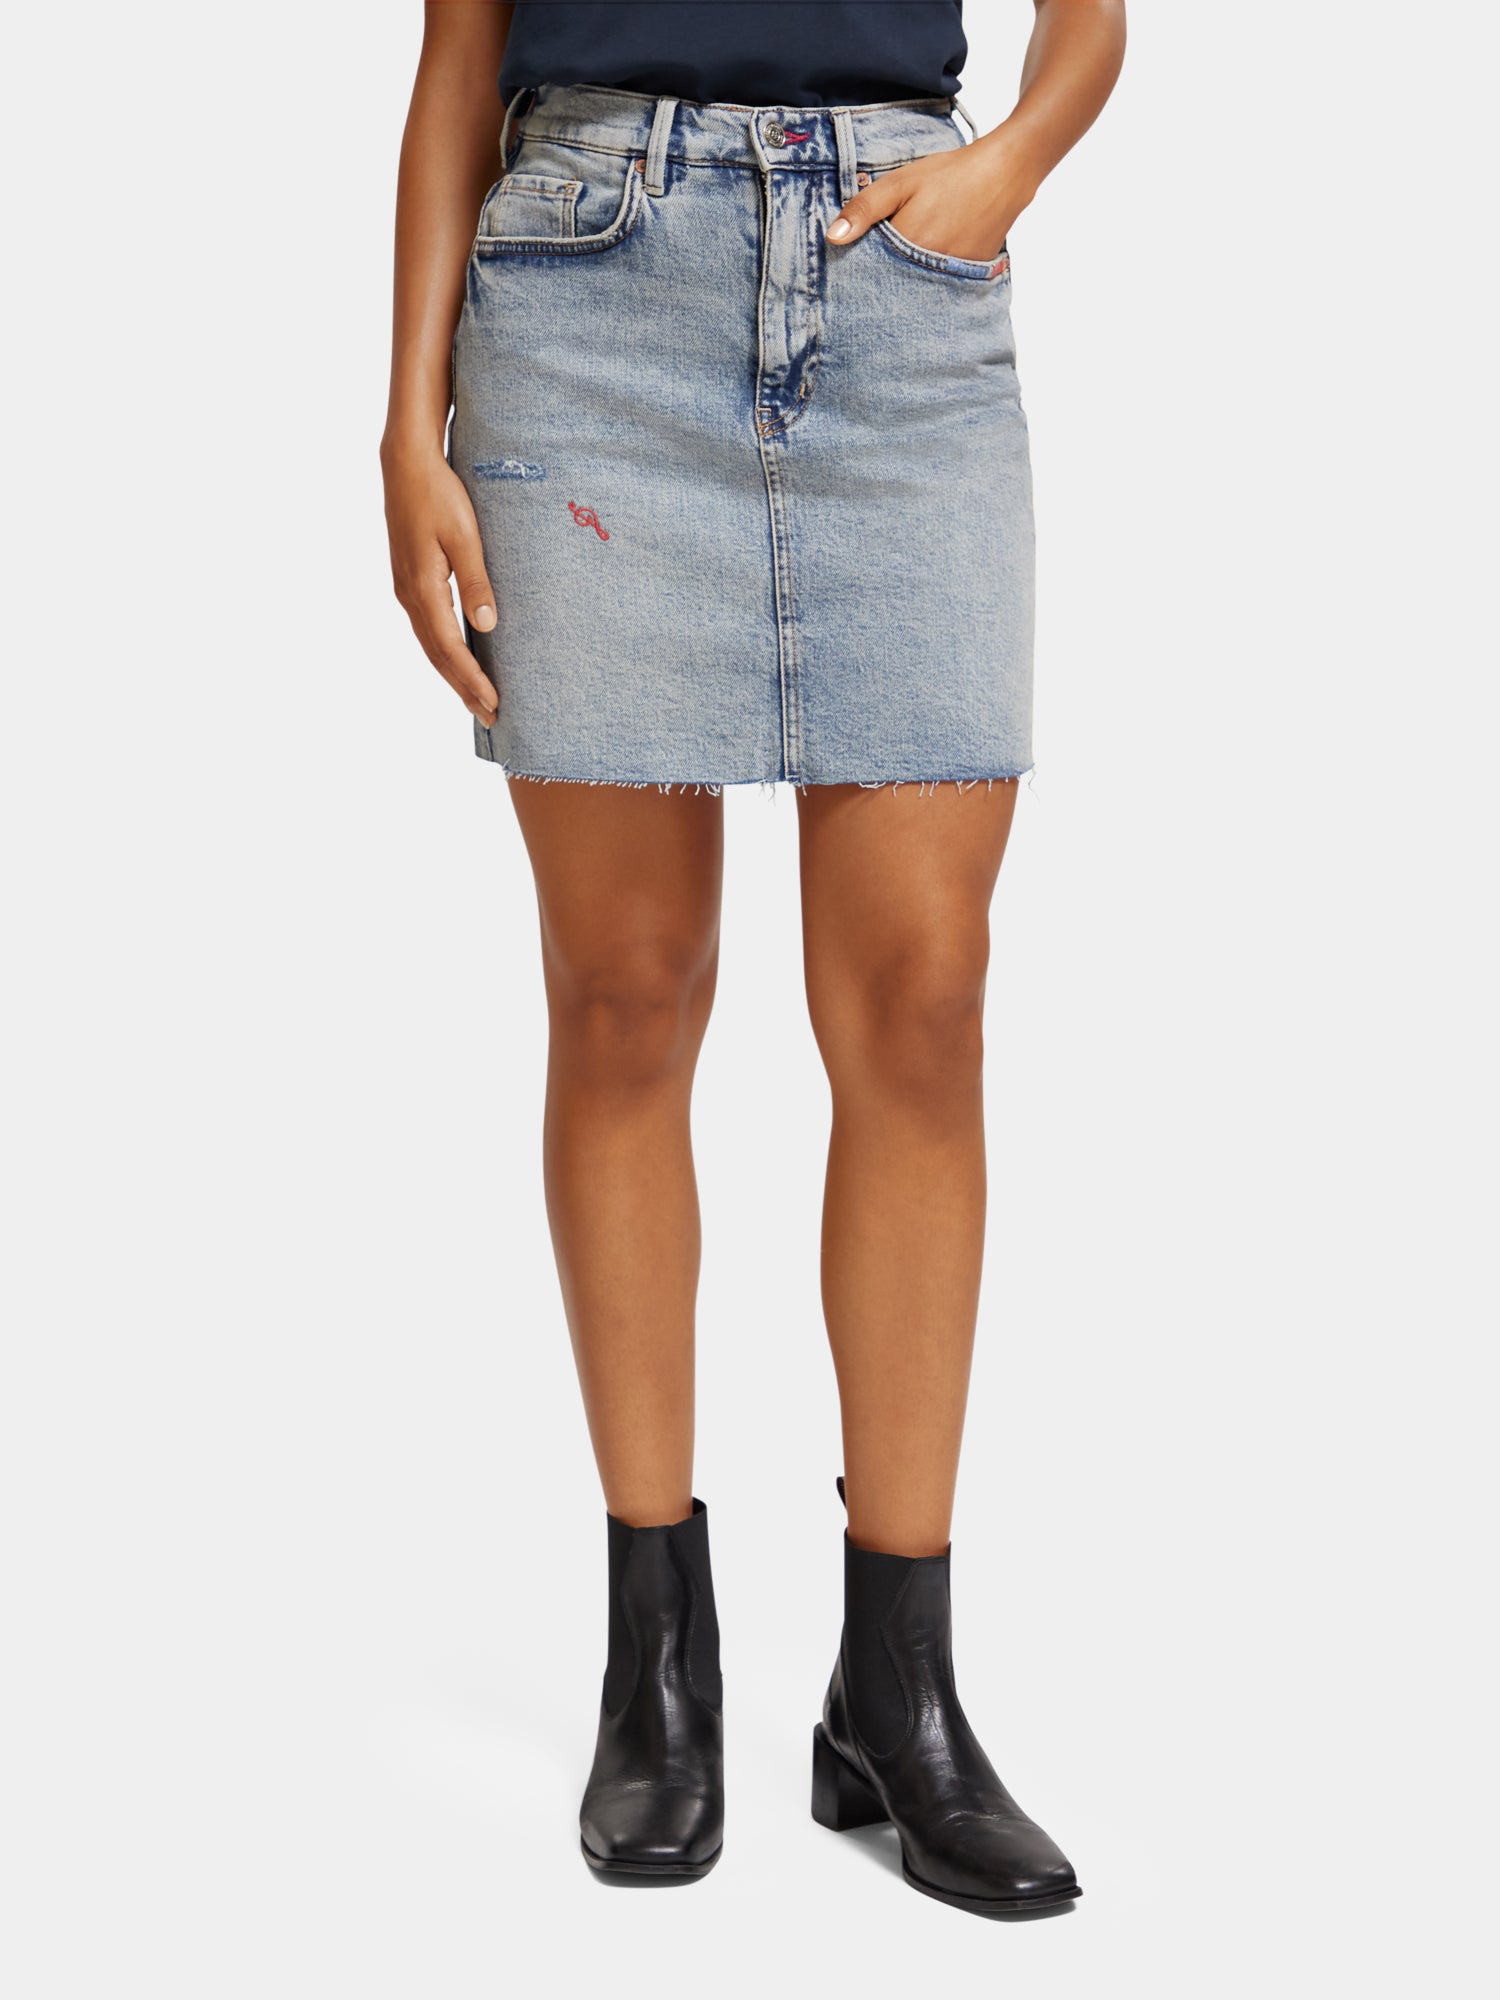 Embroidered denim mini skirt - Dance It Out